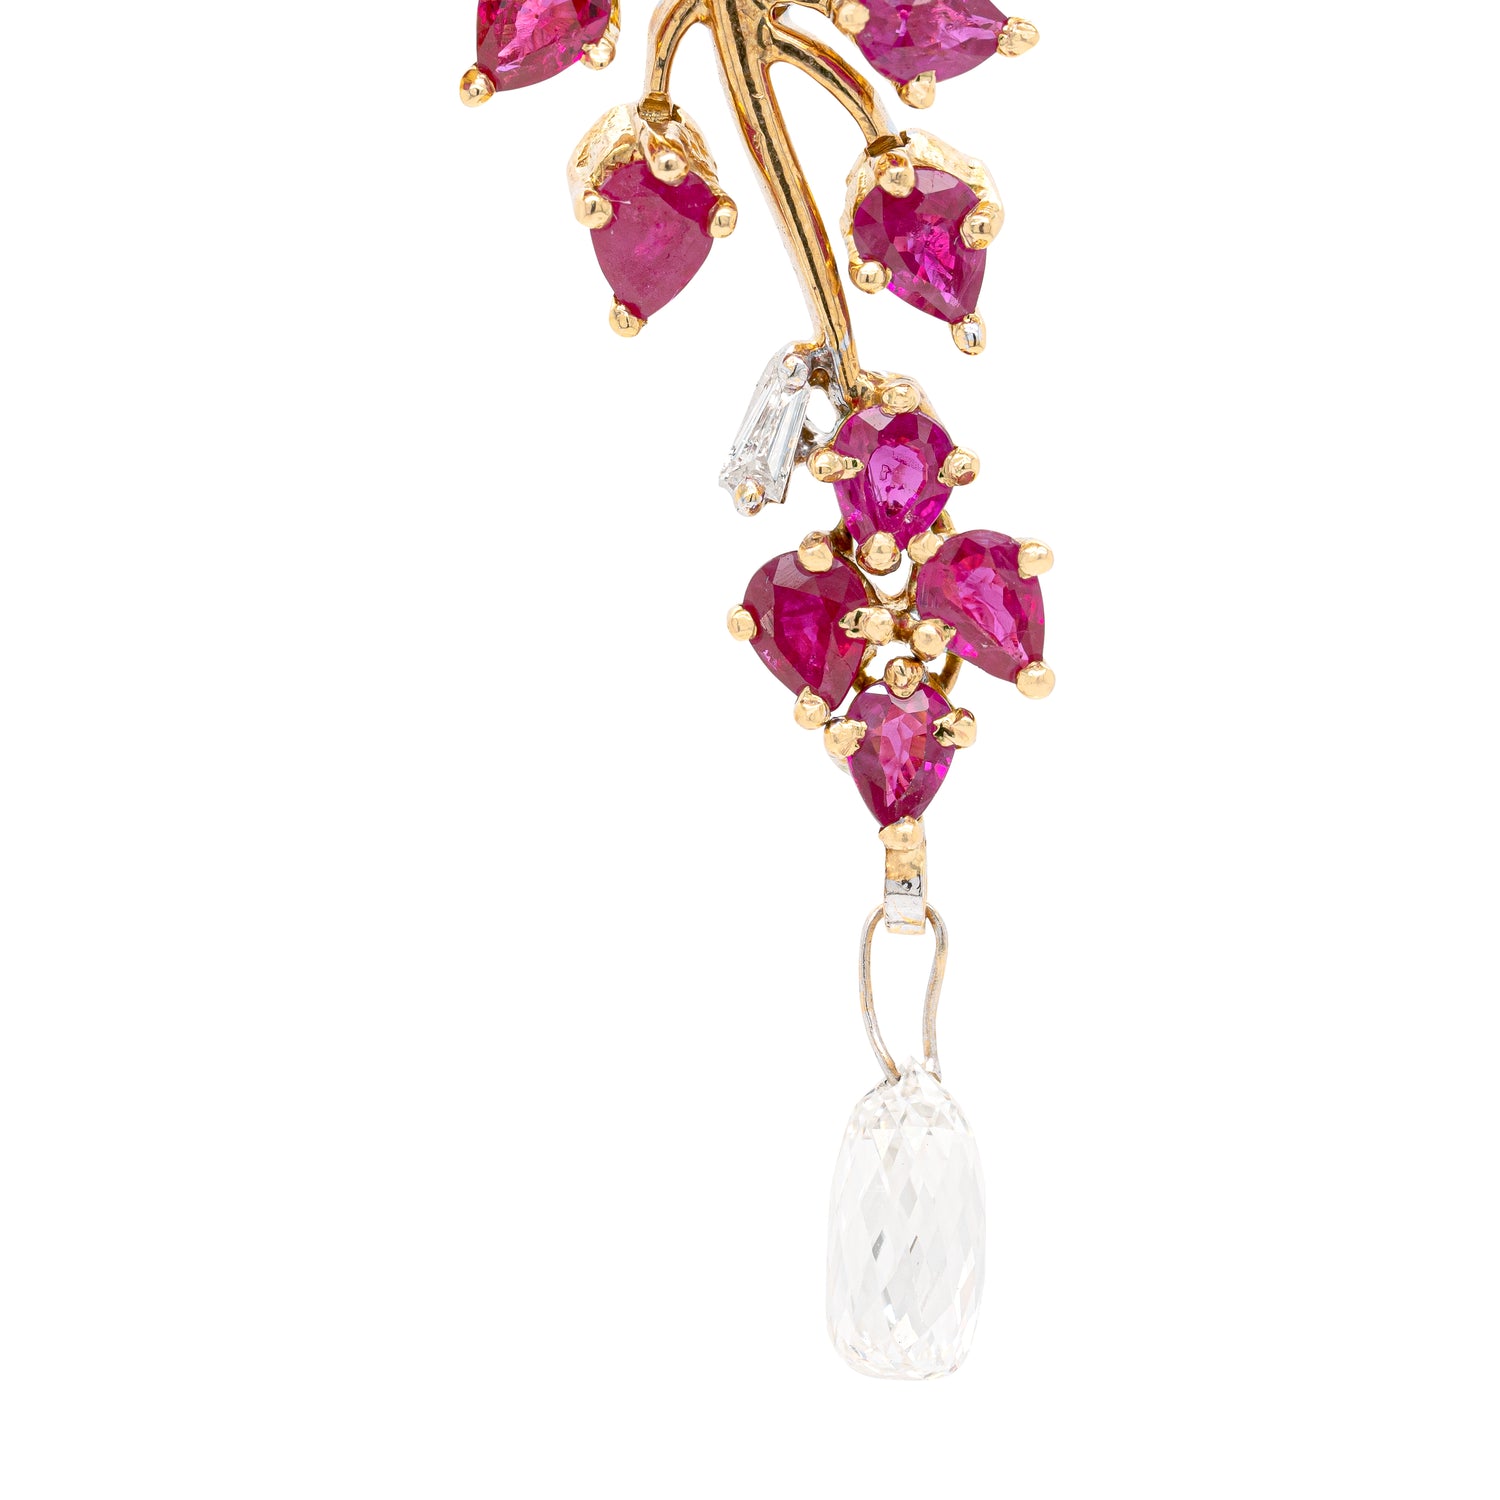 3.43ct Diamond and Ruby 18 Carat White & Yellow Gold Cascade Floral Pendant